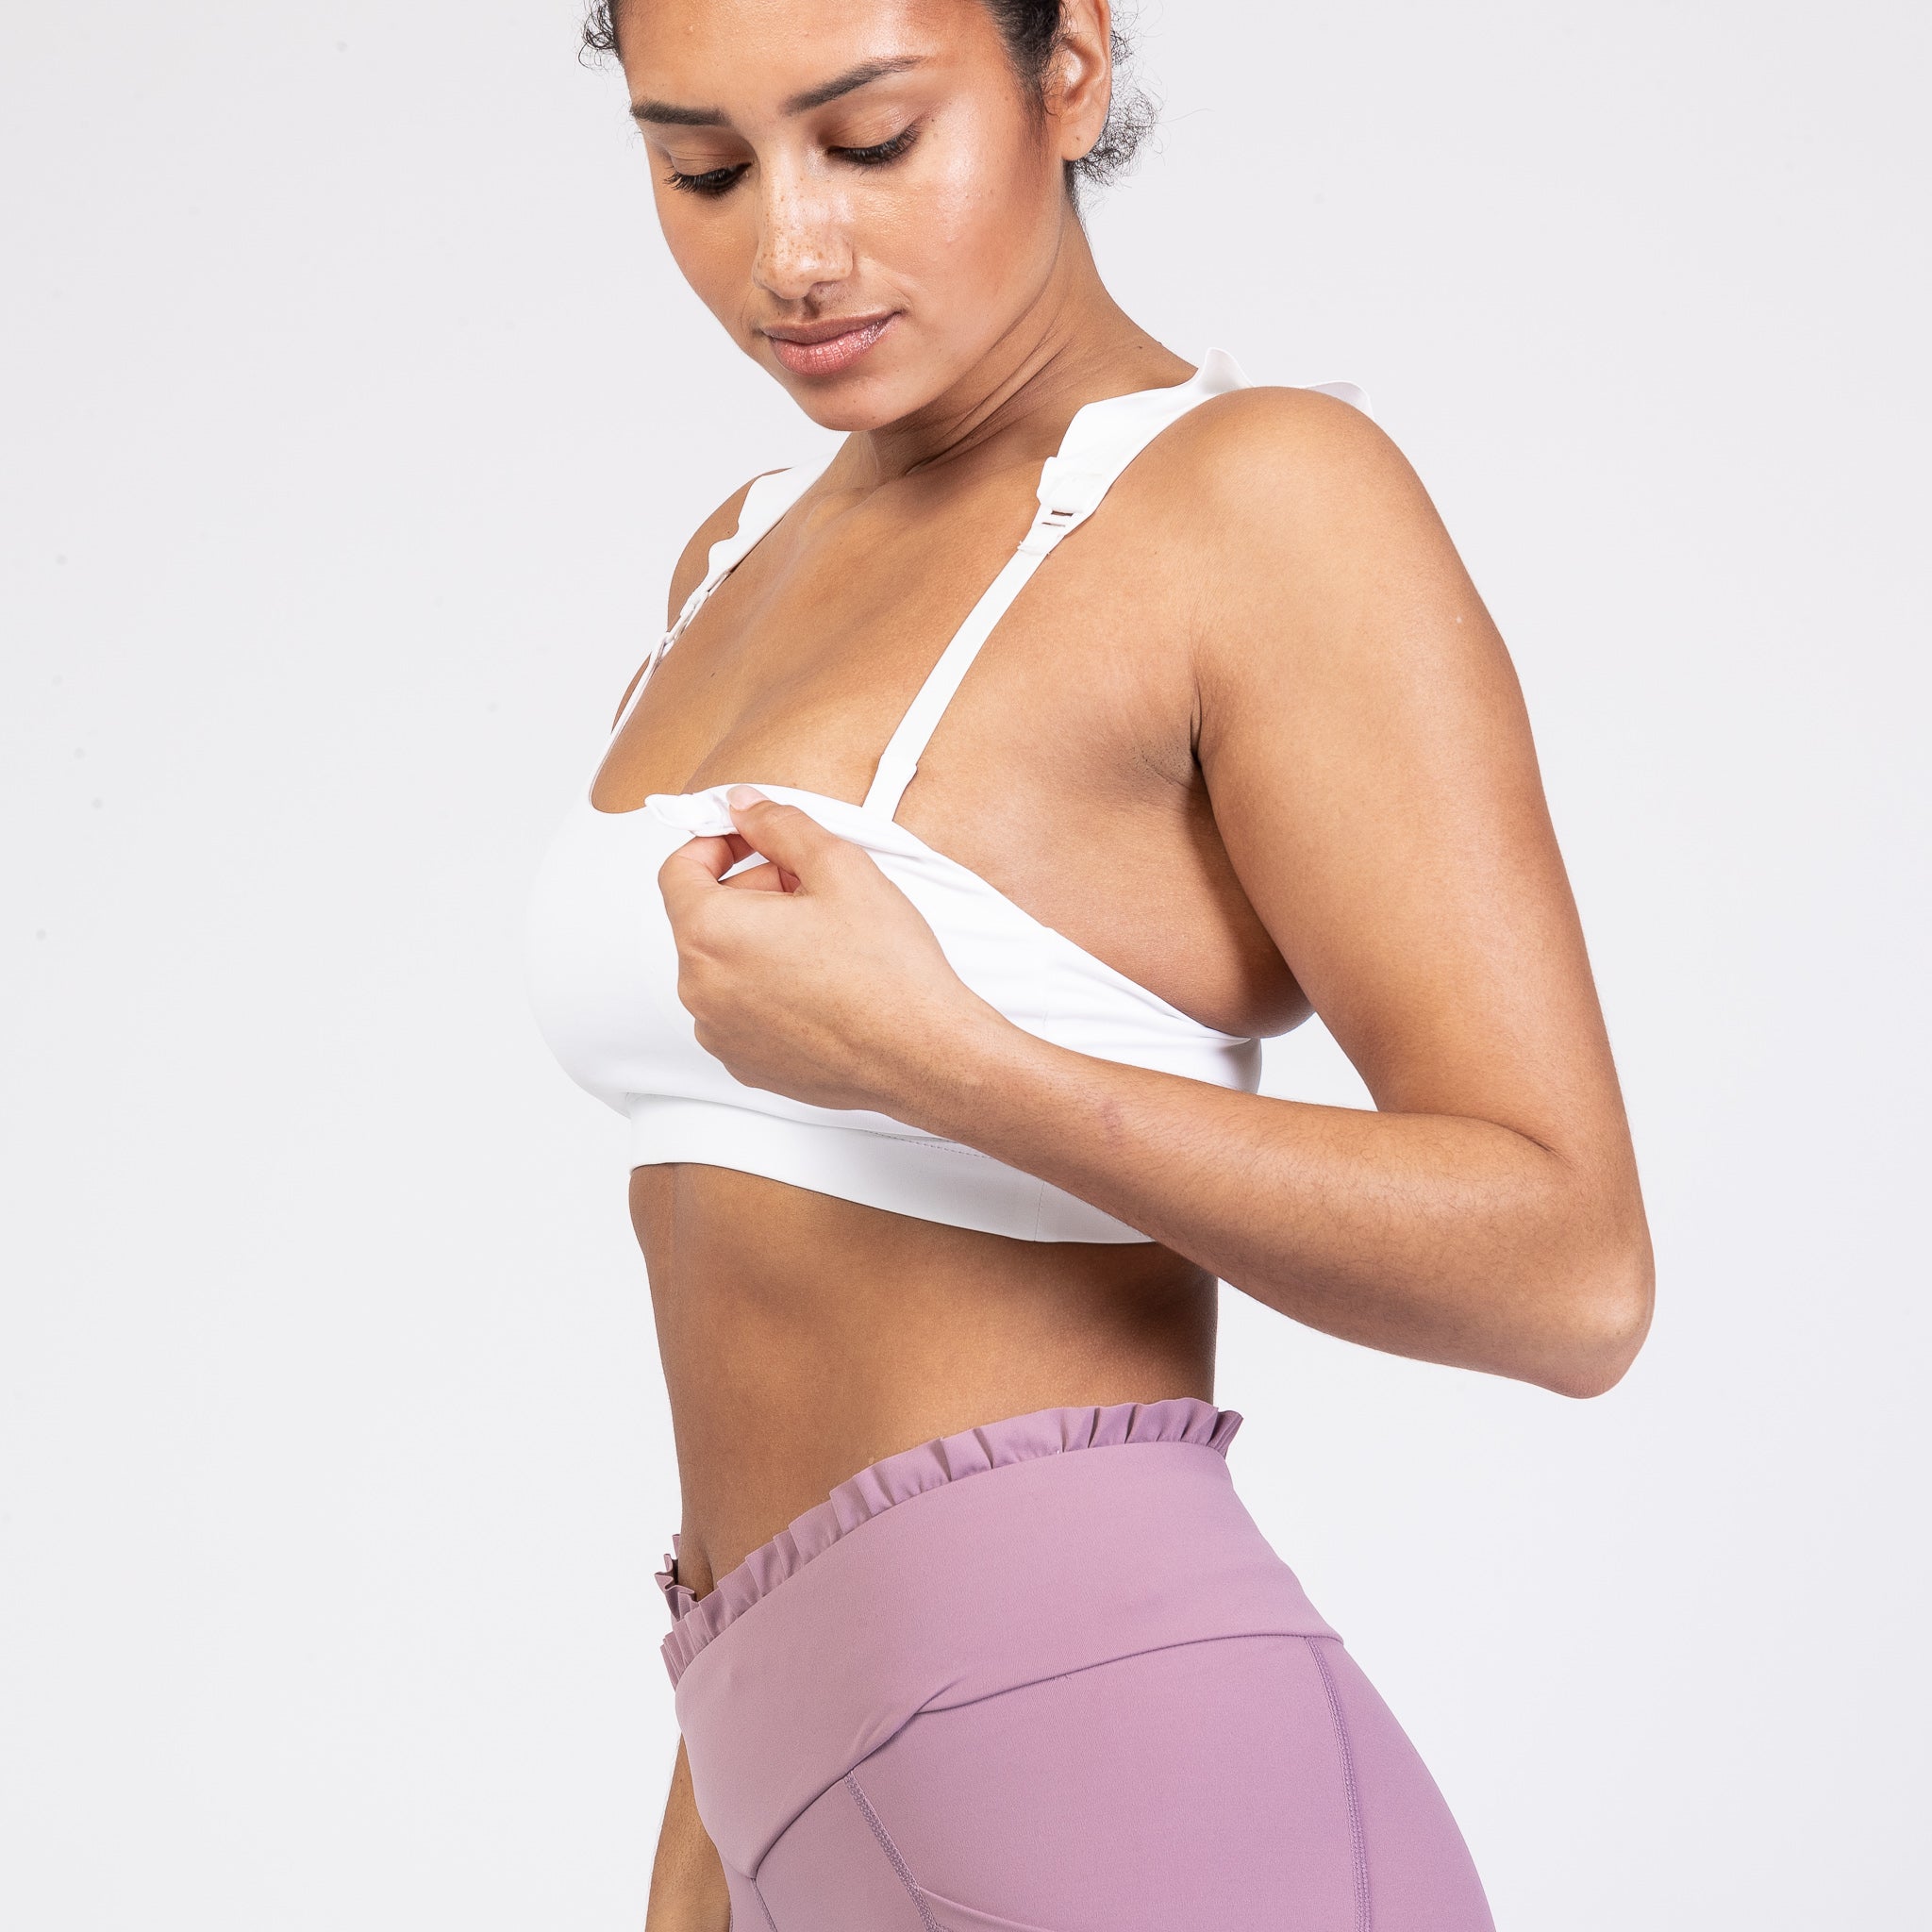 Sweat and Milk LLC: Last Few Hours to Save 20% Sitewide + Free Nursing Top  on $120